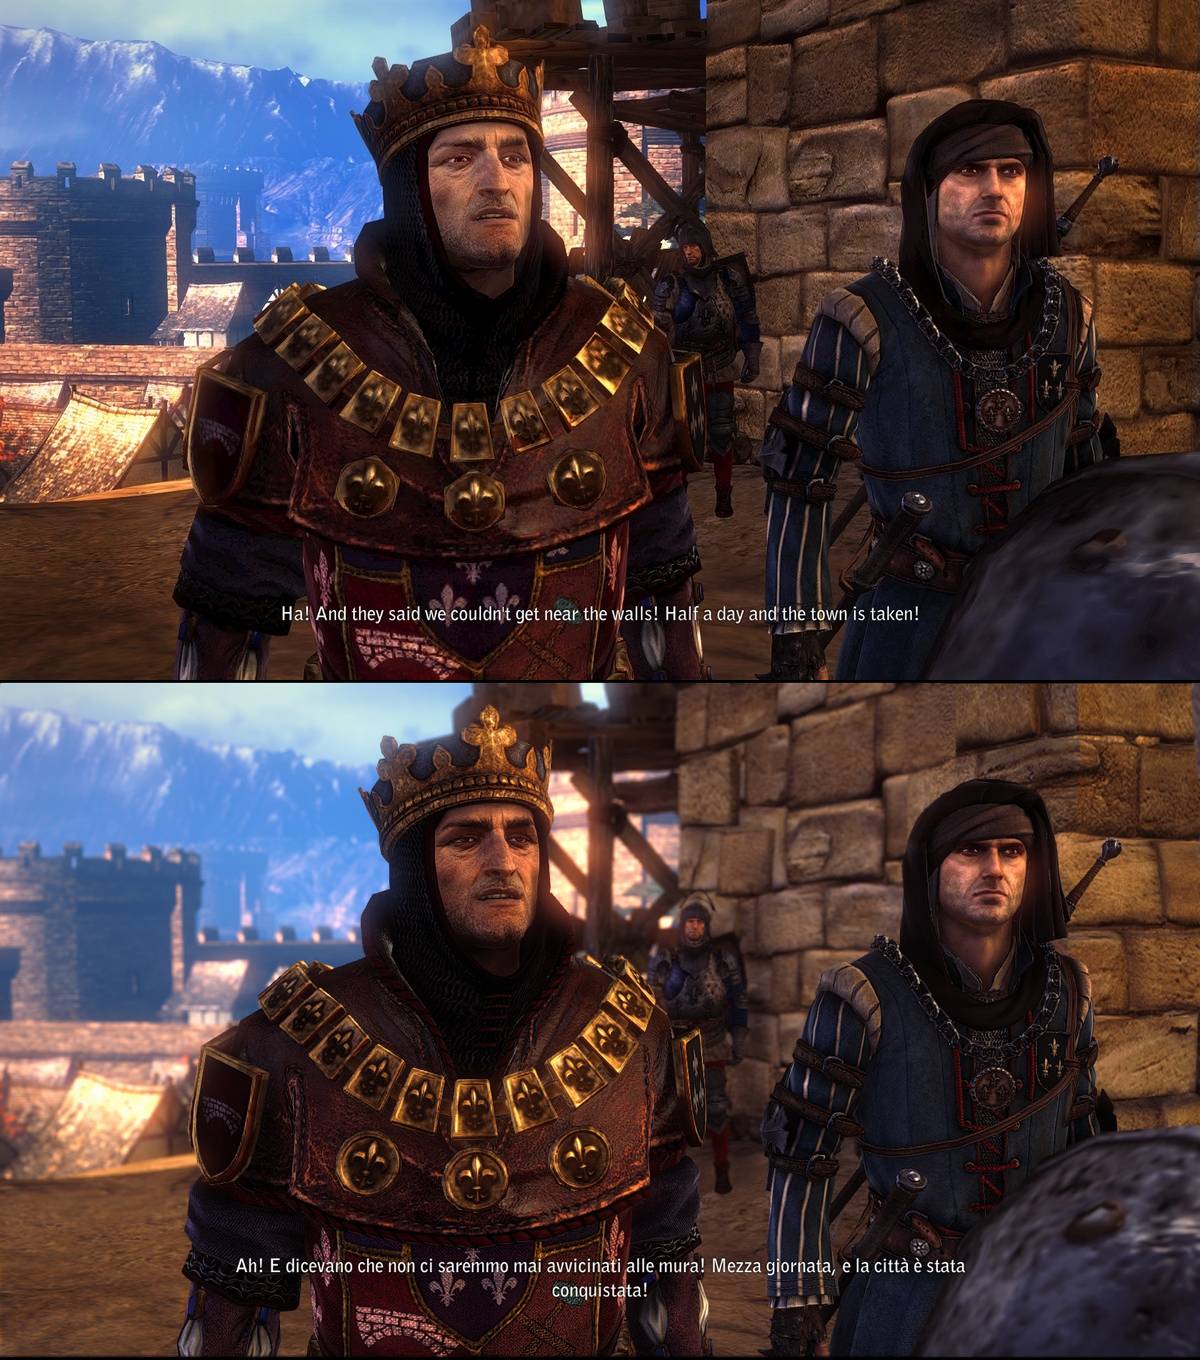 The Witcher 2: Assassins of Kings Xbox 360 Versus PC: Can You Spot